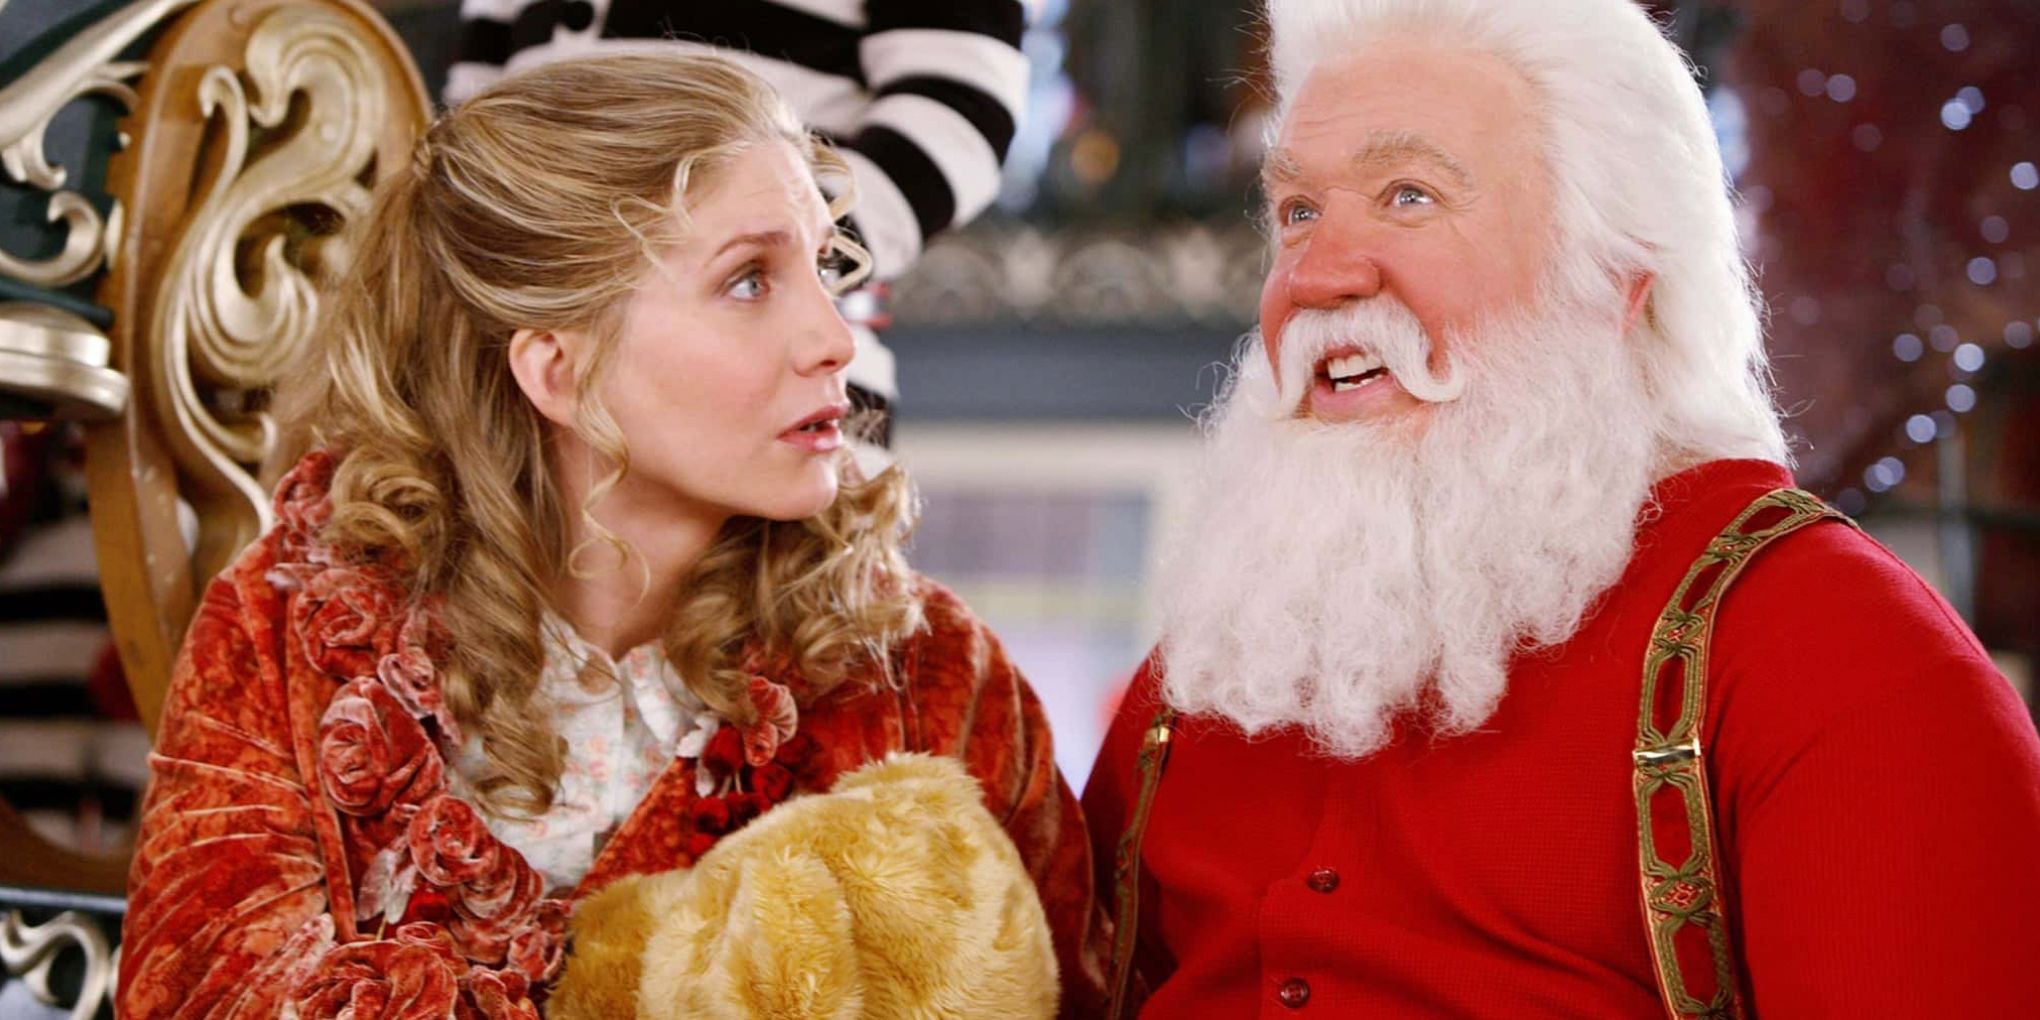 Elizabeth Mitchell as Carol and Tim Allen as Scott in The Santa Clause 2 during a visit to the North Pole